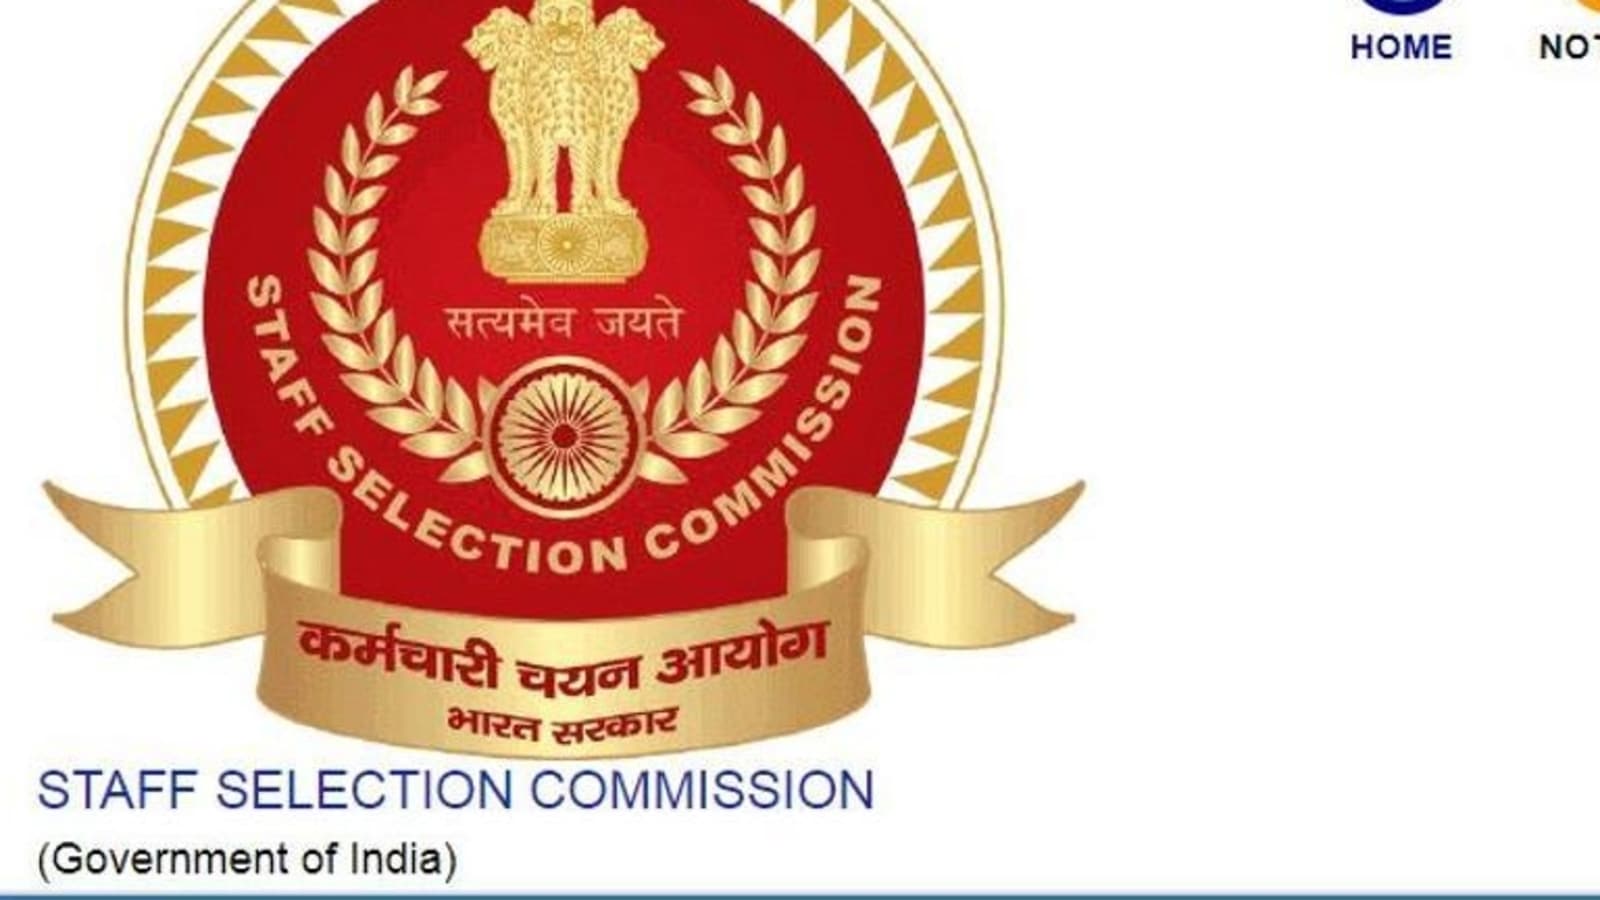 SSC JHT 2020 Exam: Final vacancy position released